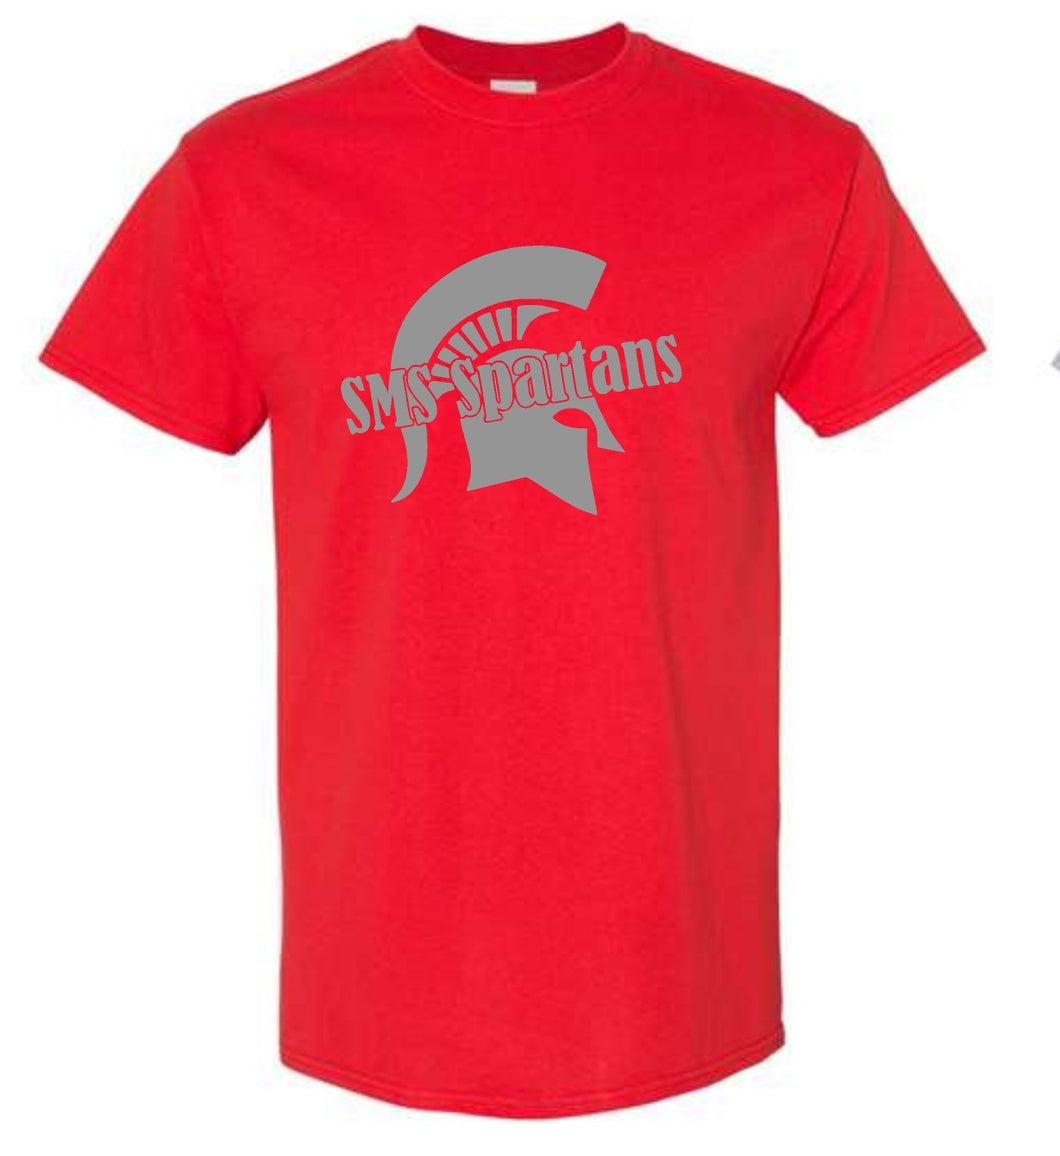 SMS Spartans Tee